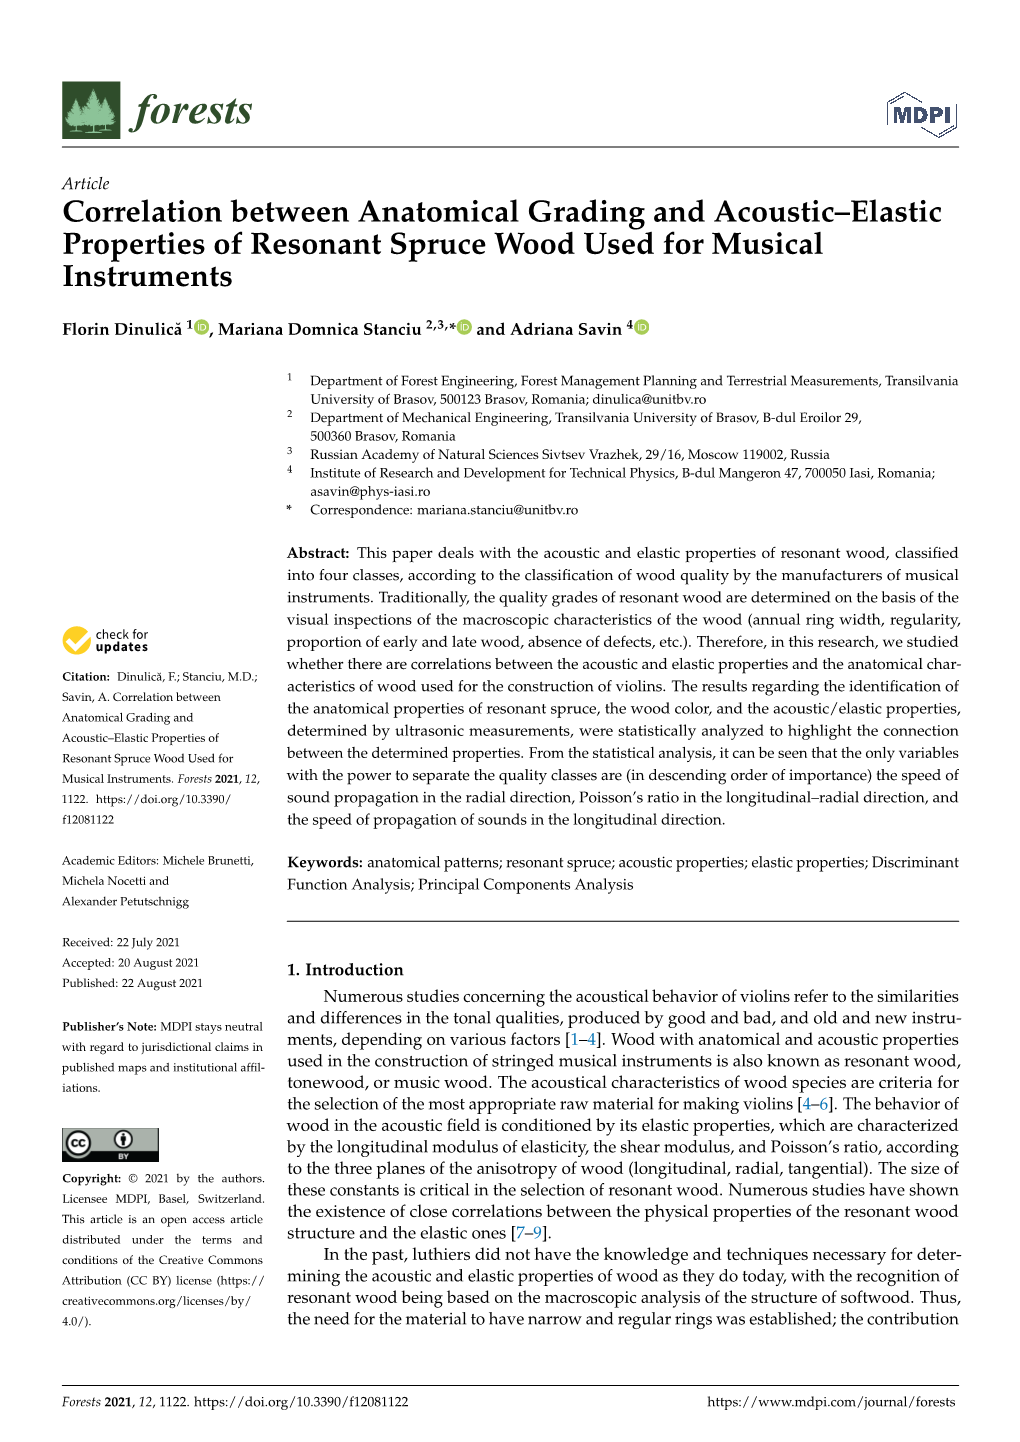 Correlation Between Anatomical Grading and Acoustic–Elastic Properties of Resonant Spruce Wood Used for Musical Instruments